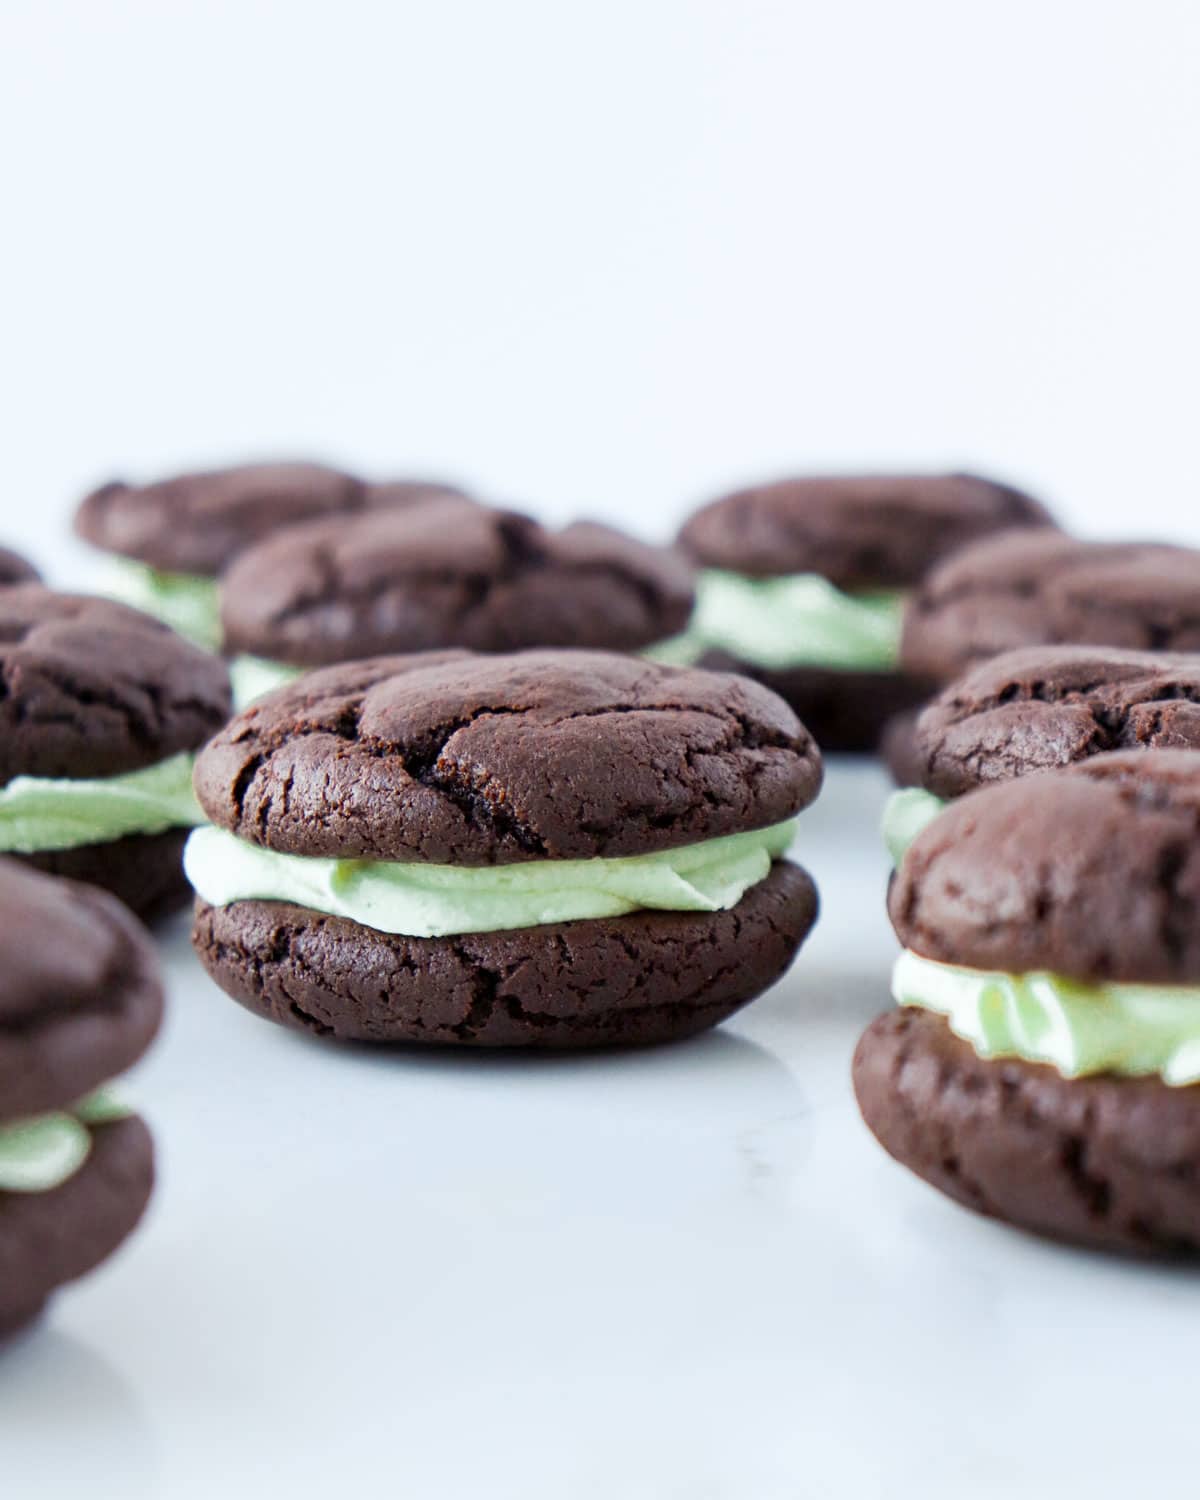 Chocolate cookies sandwiched with green mint frosting in between.